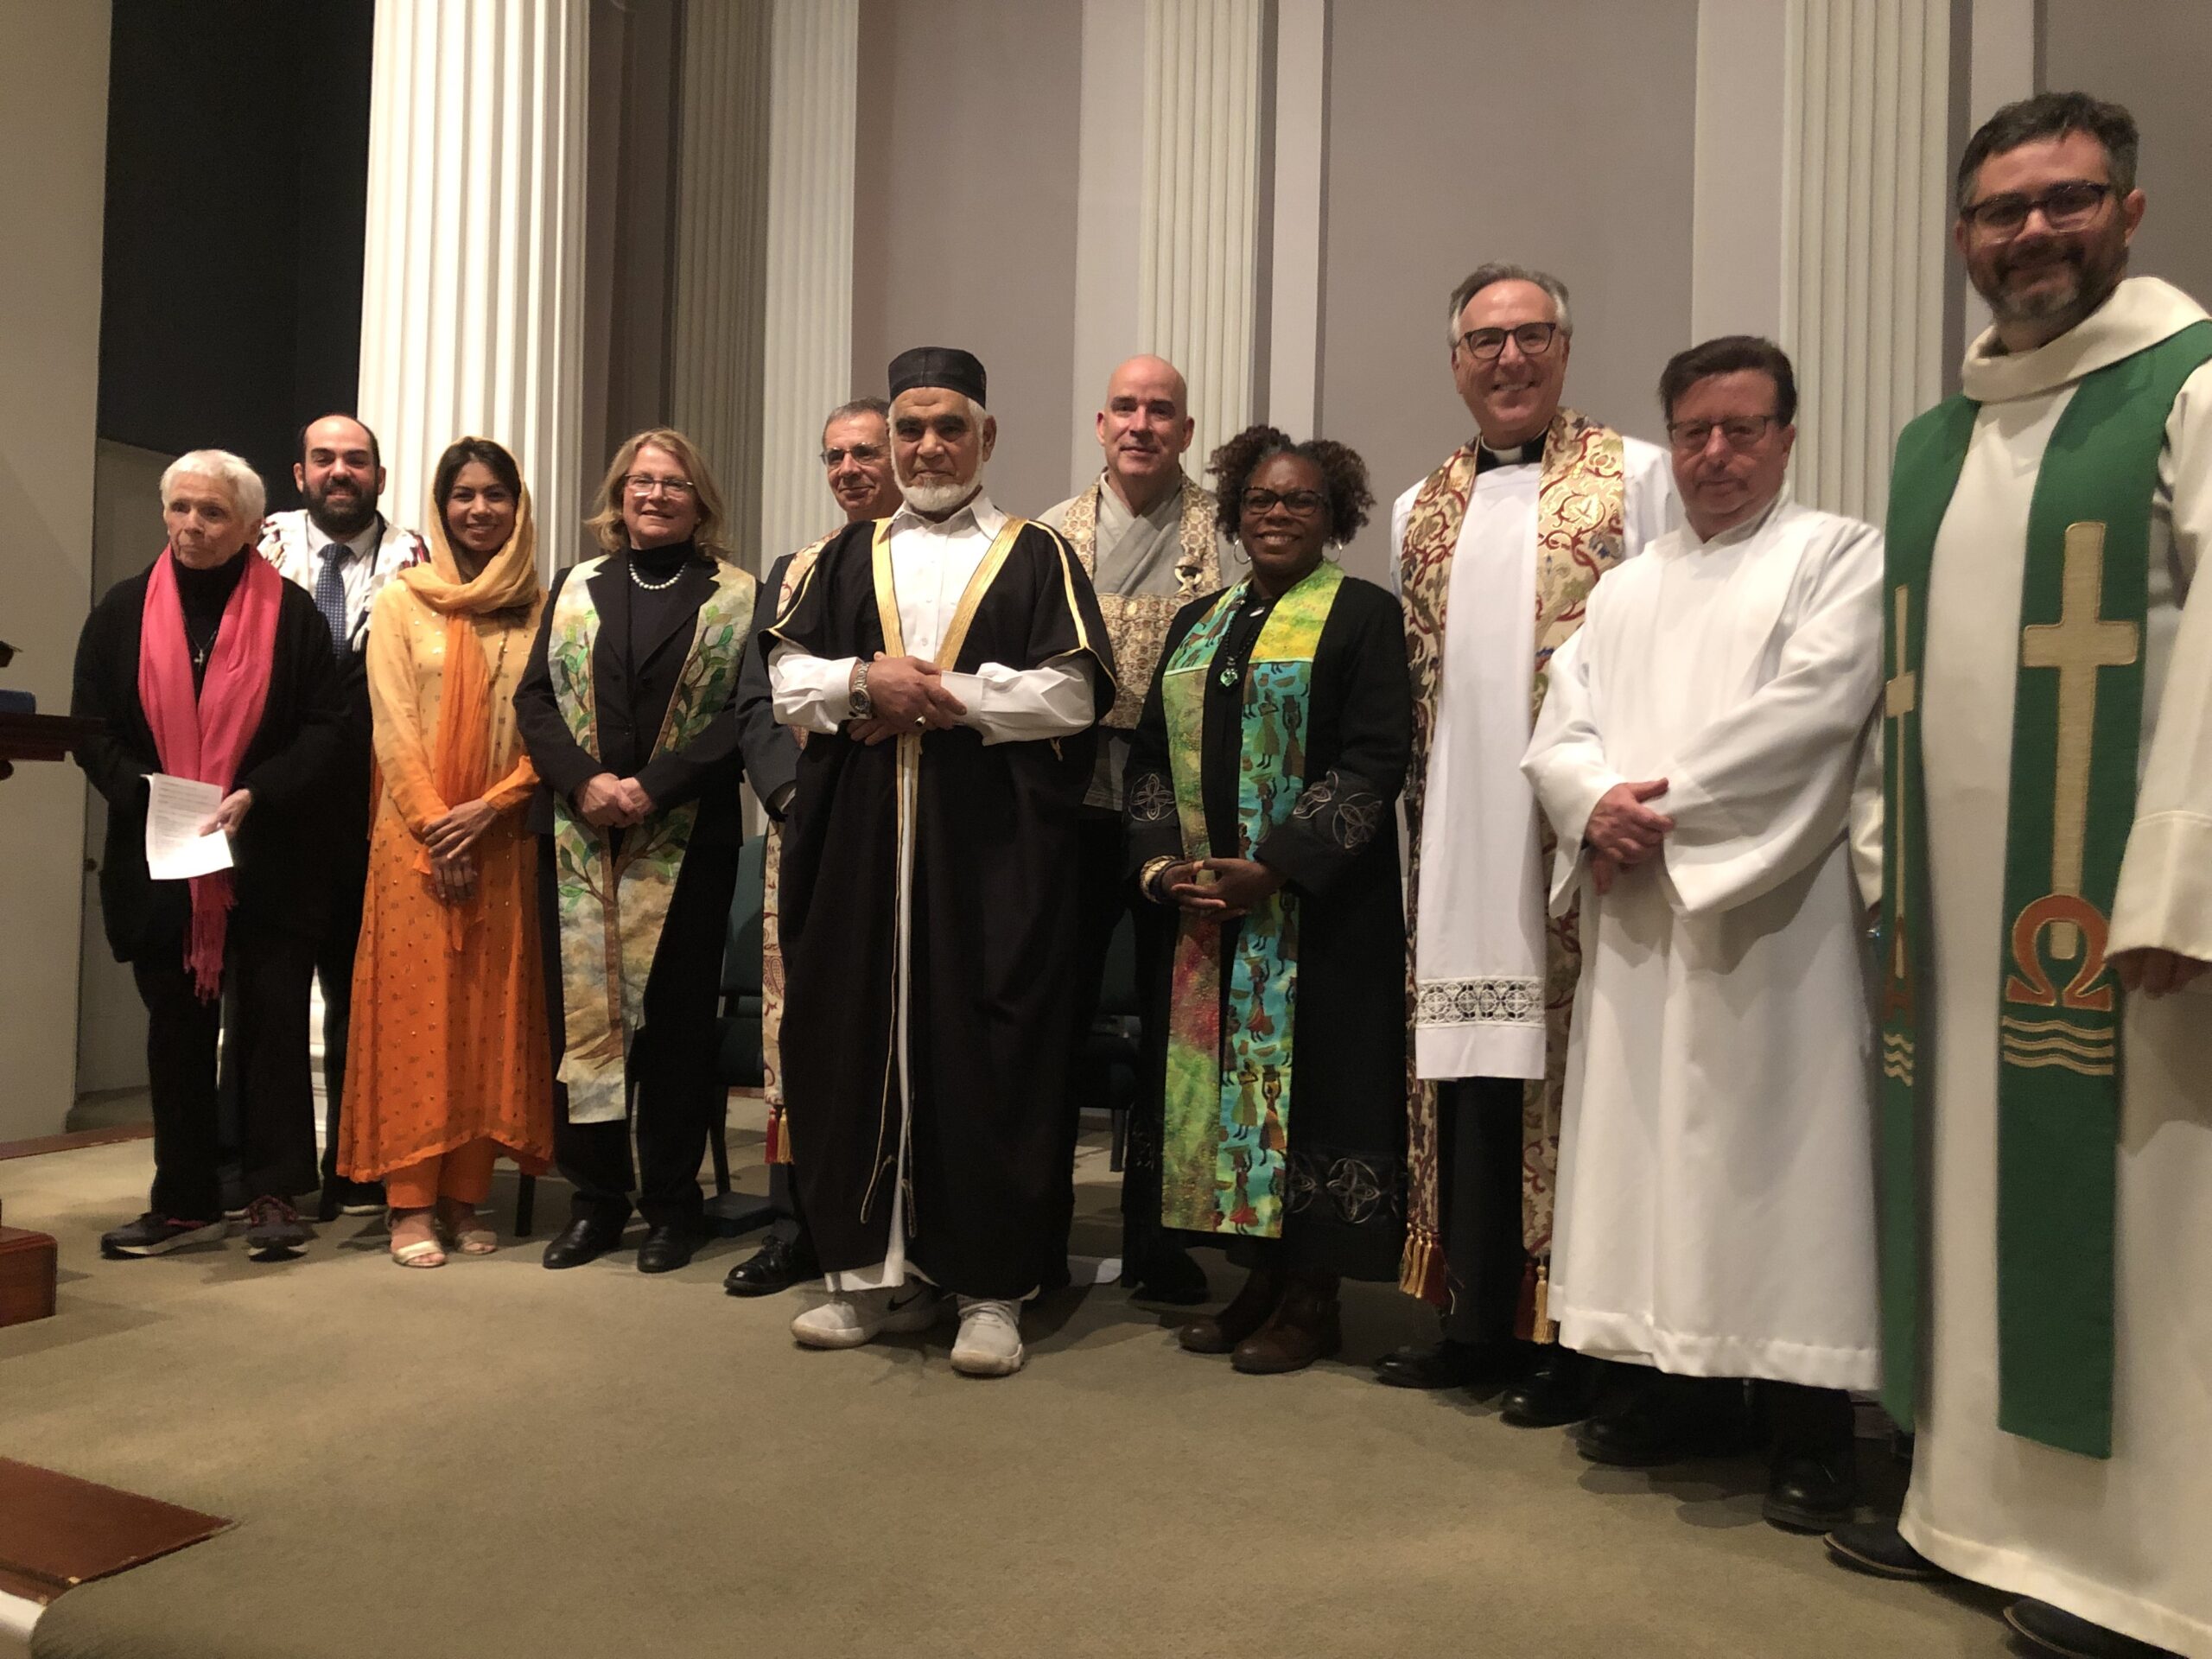 Faith leaders from across the area gathered at the Old Whalers First Presbyterian Church in Sag Harbor on Thursday night for an inter-faith service and Thanksgiving celebration. CAILIN RILEY PHOTOS